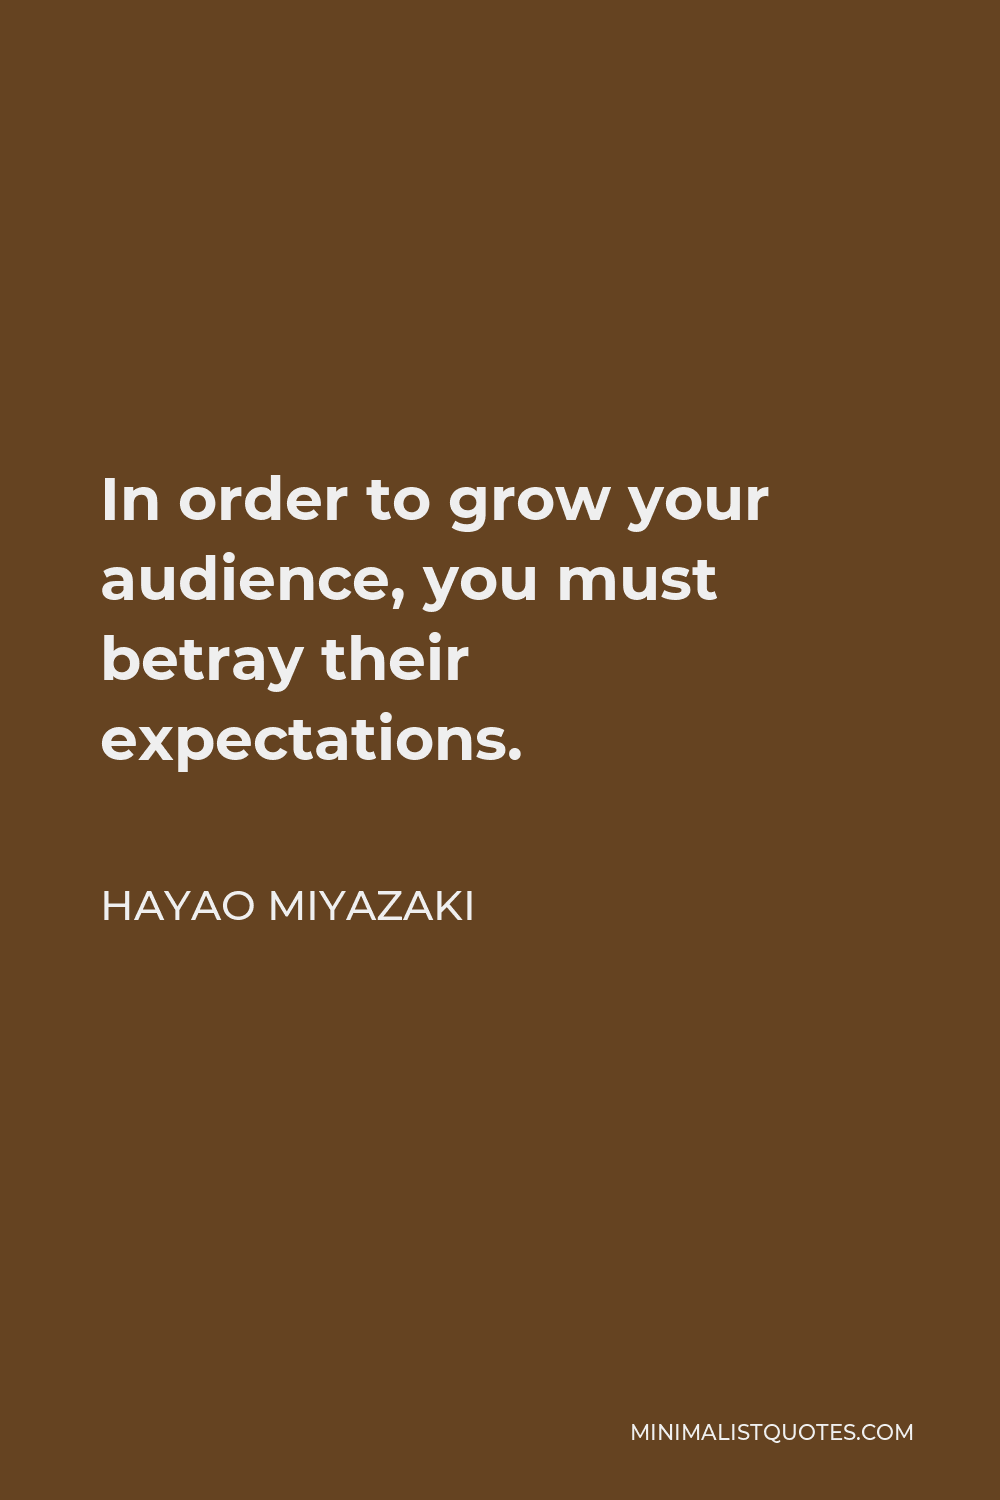 Hayao Miyazaki Quote - In order to grow your audience, you must betray their expectations.